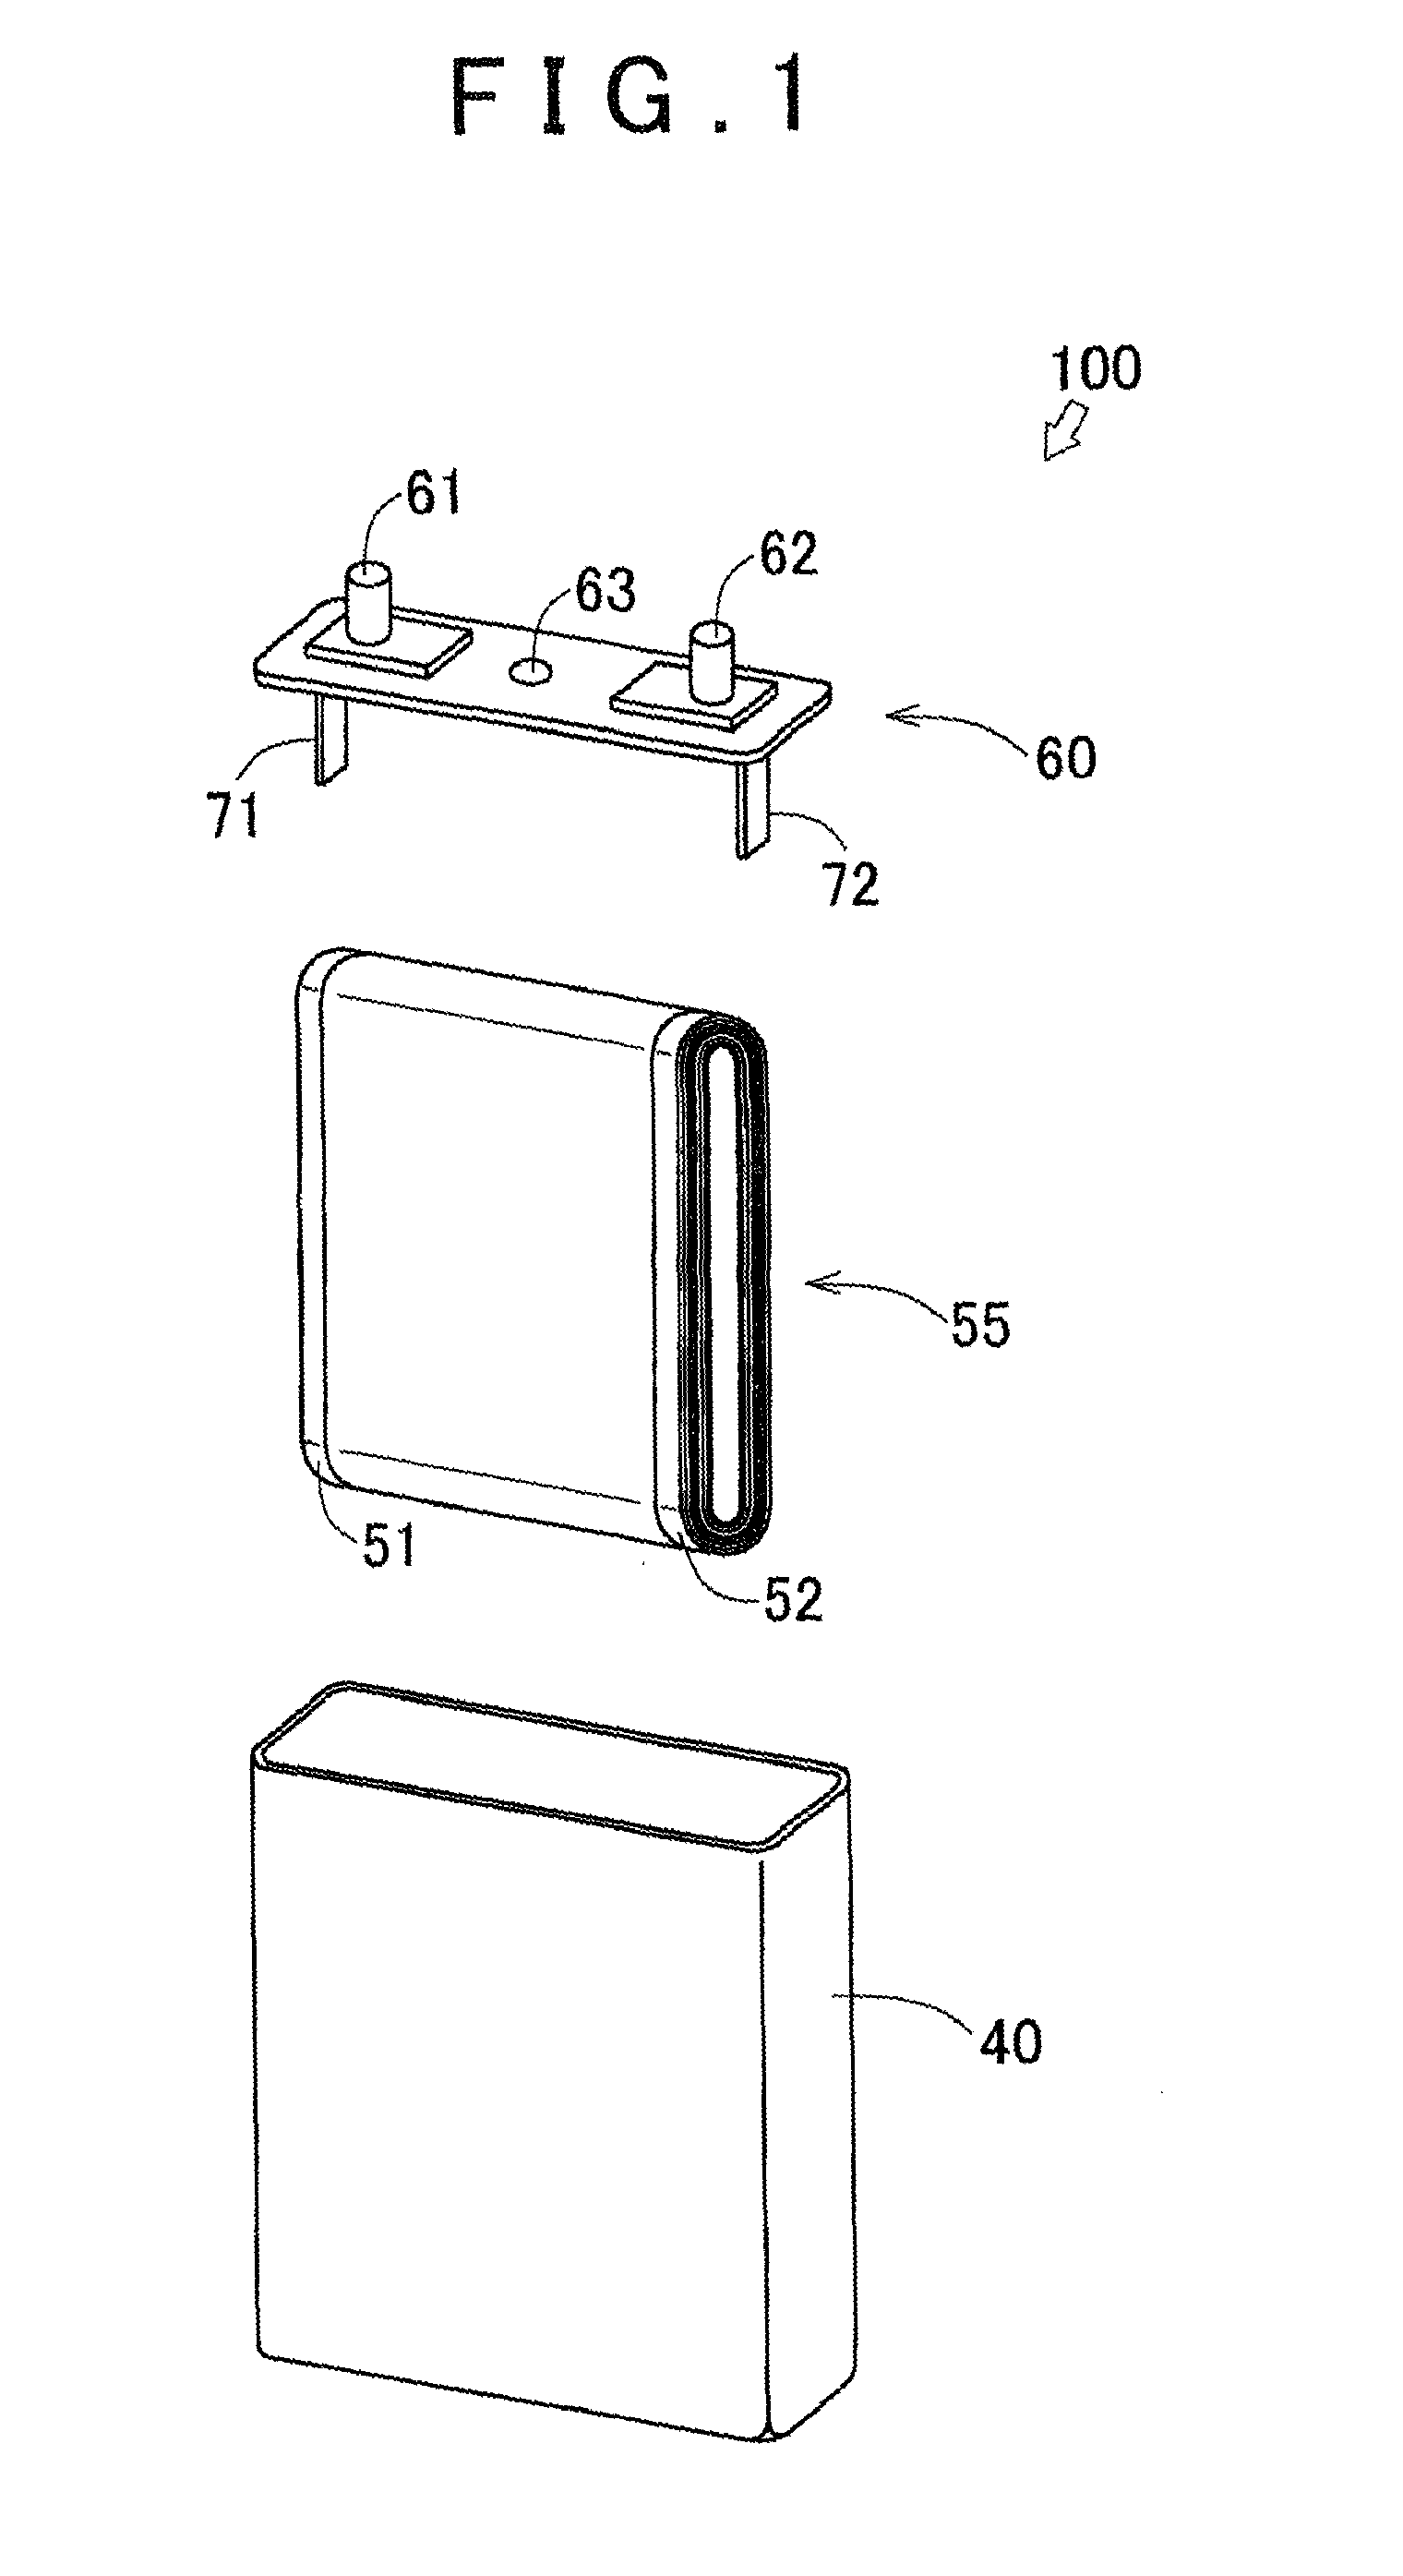 Nonaqueous electrolyte secondary battery and method of manufacturing nonaqueous electrolyte secondary battery